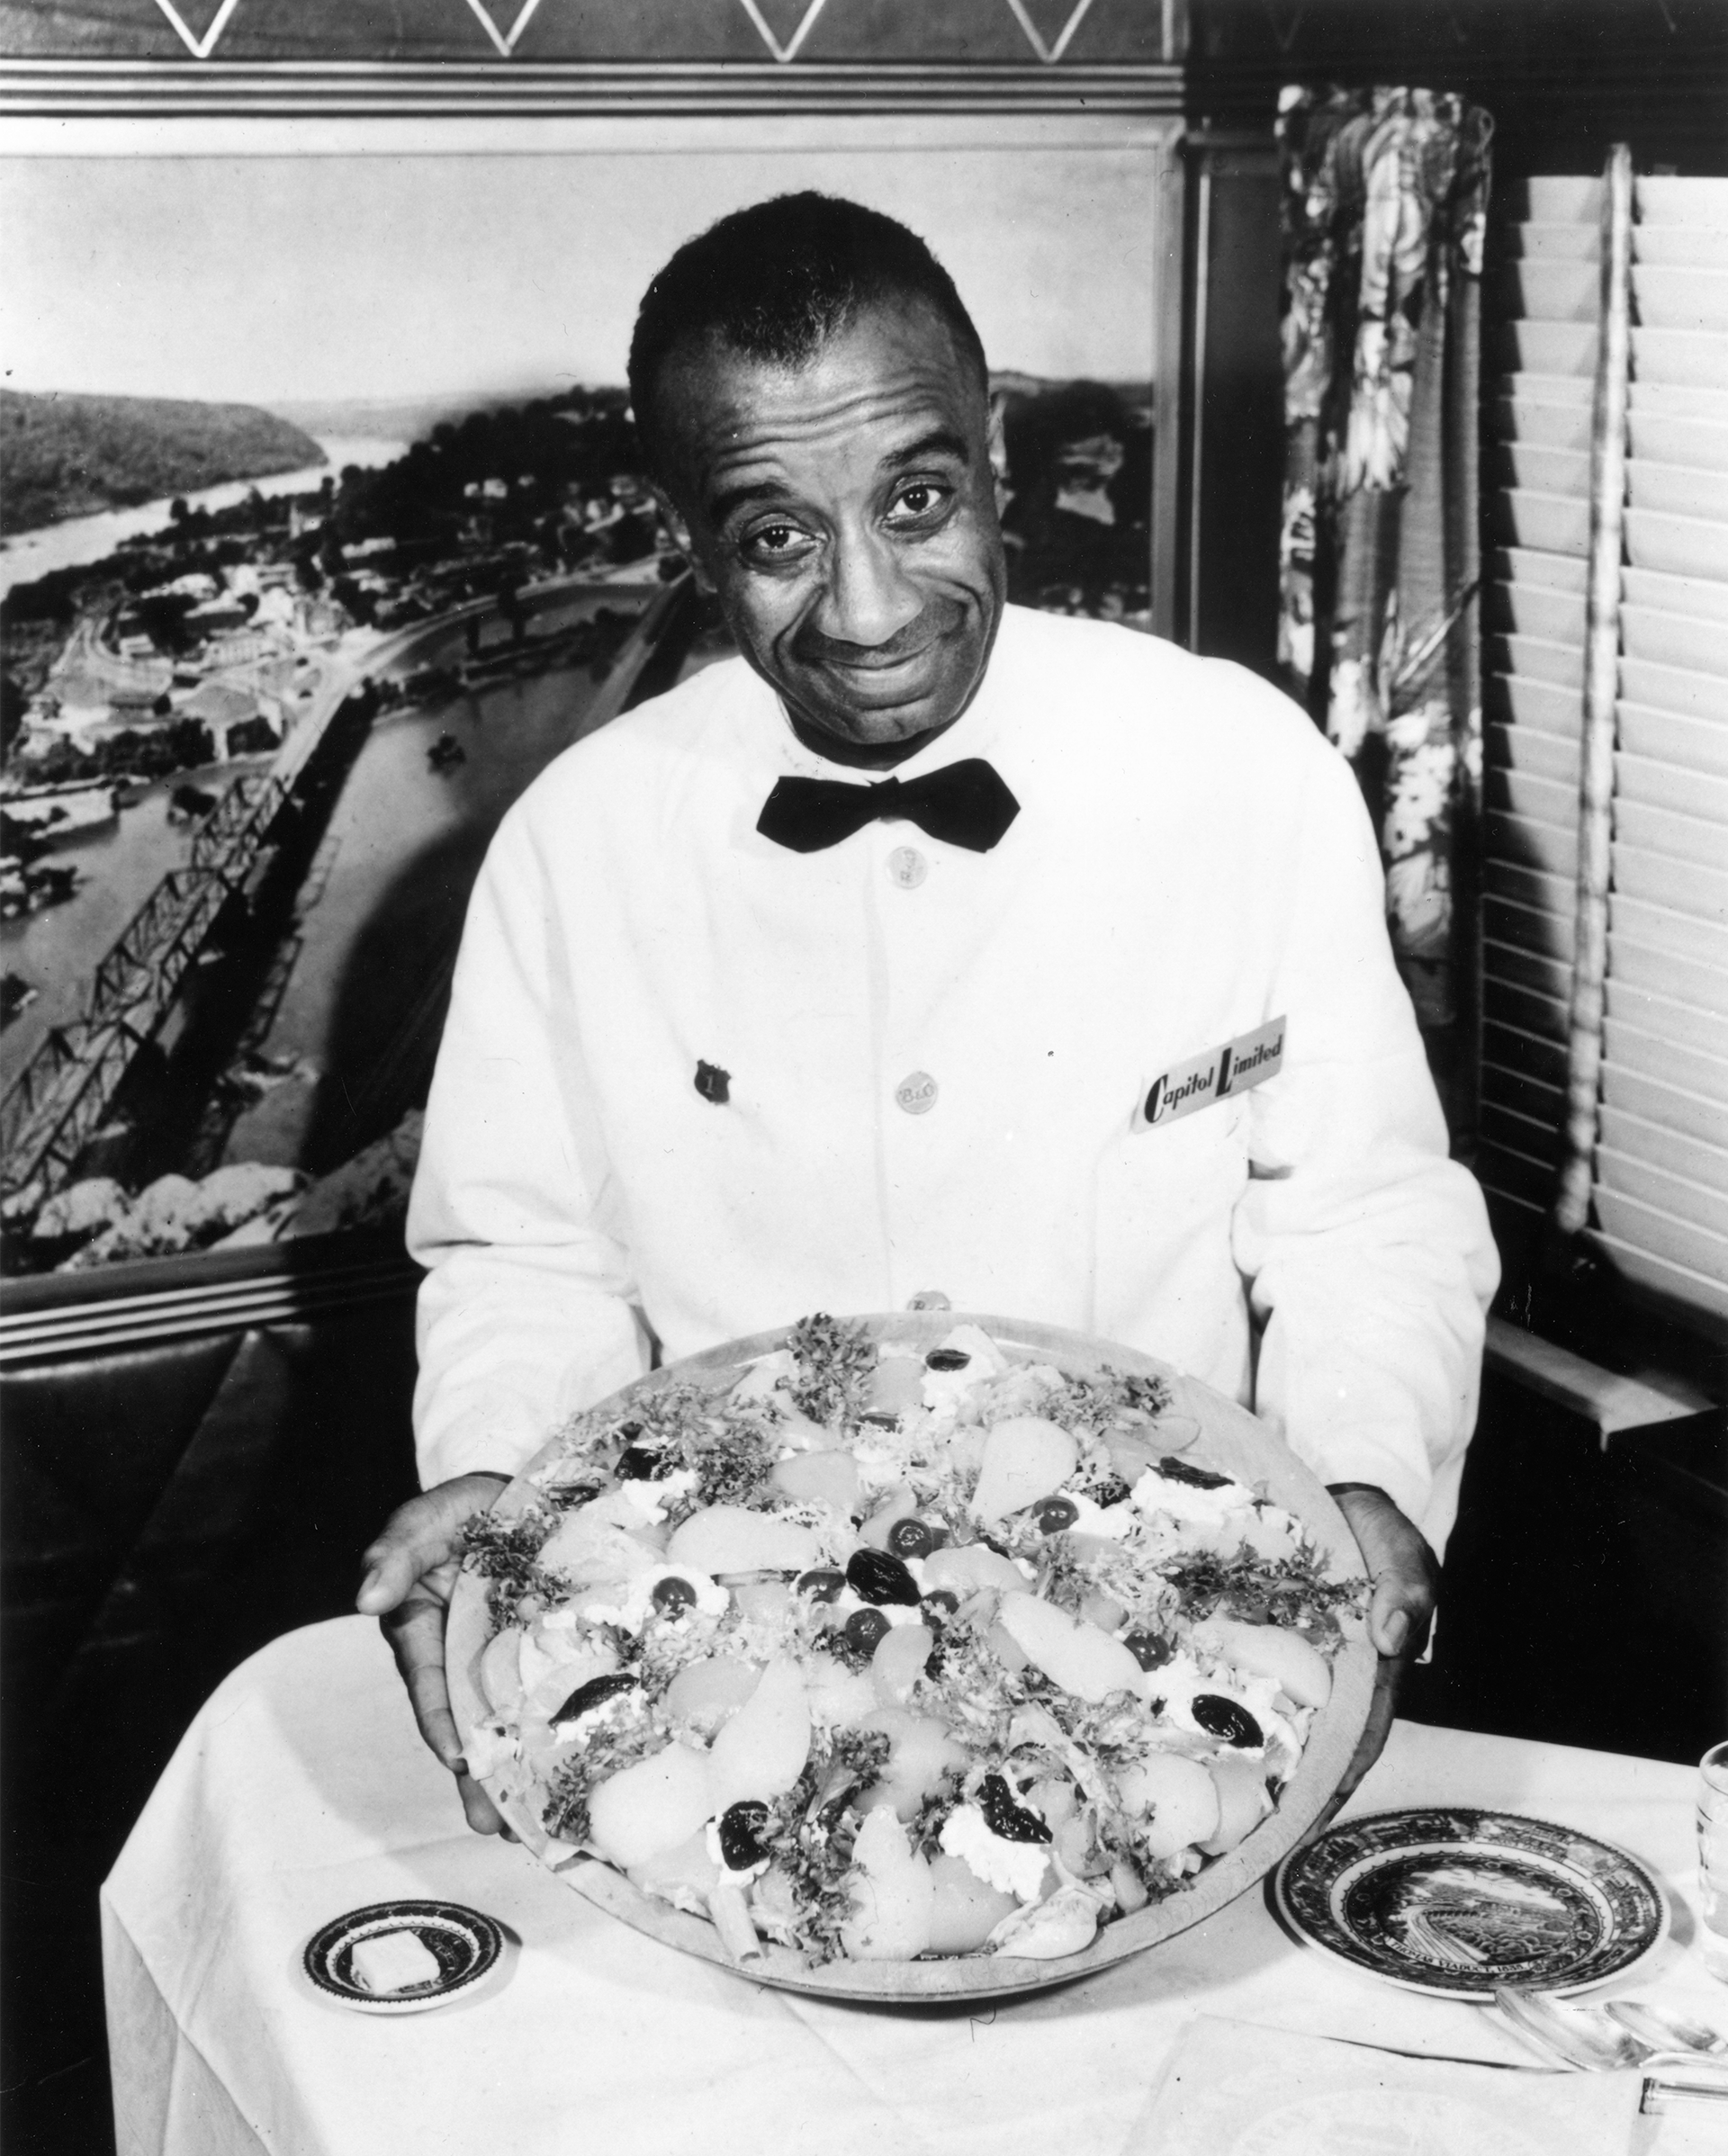 This black and white photograph shows a man in a white waiter's uniform and a black bow tie holding a large plate of food above a table. The plate has several different items on it.